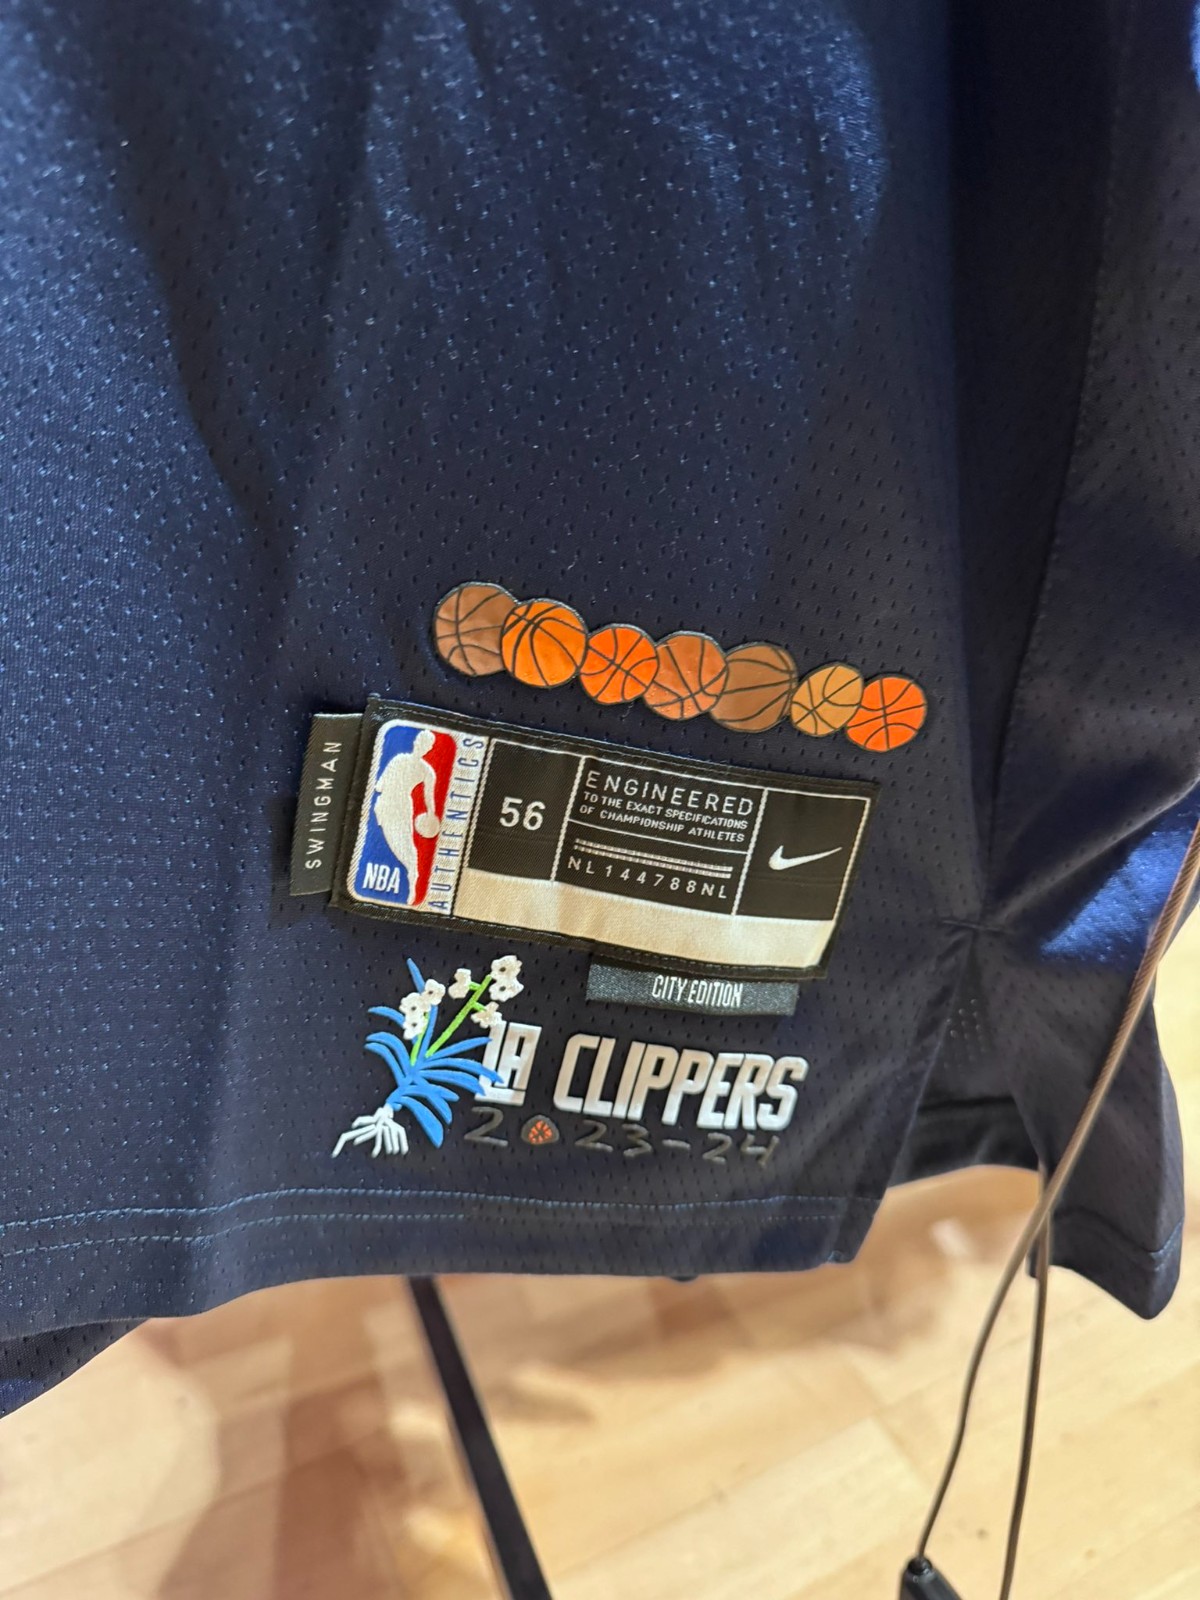 Los Angeles Clippers City Edition Shorts. ☑️ Actual Photo